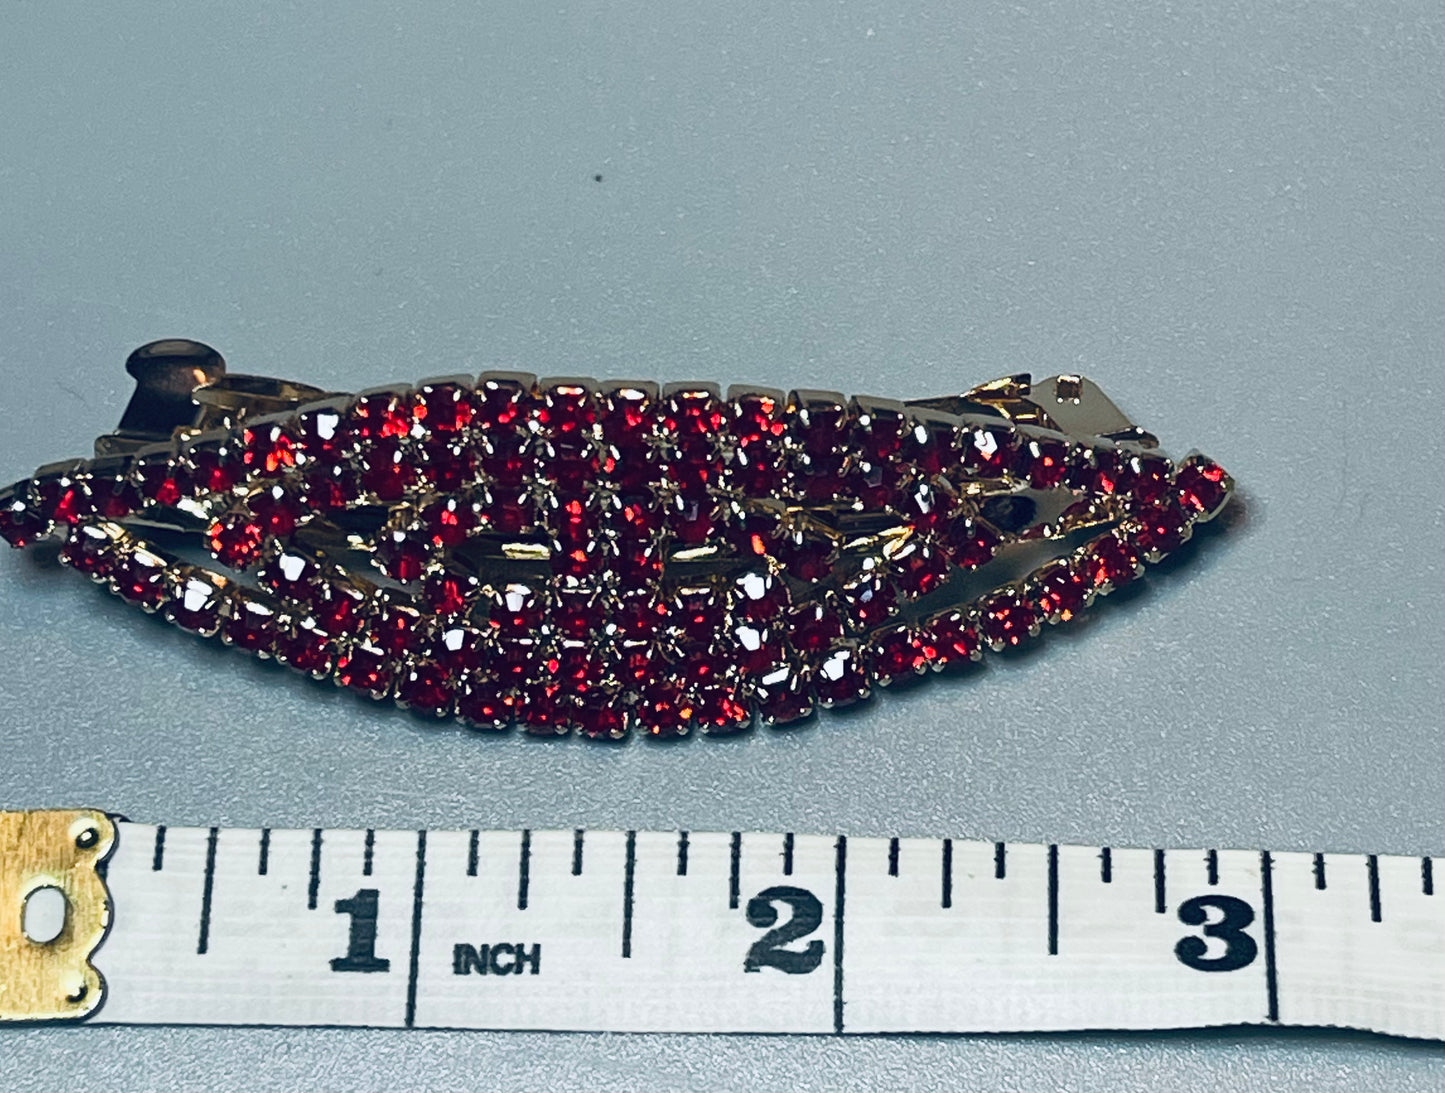 Ruby Red Crystal rhinestone barrette approximately 3.0” gold tone formal hair accessories gift wedding bridesmaid Prom birthday gifts